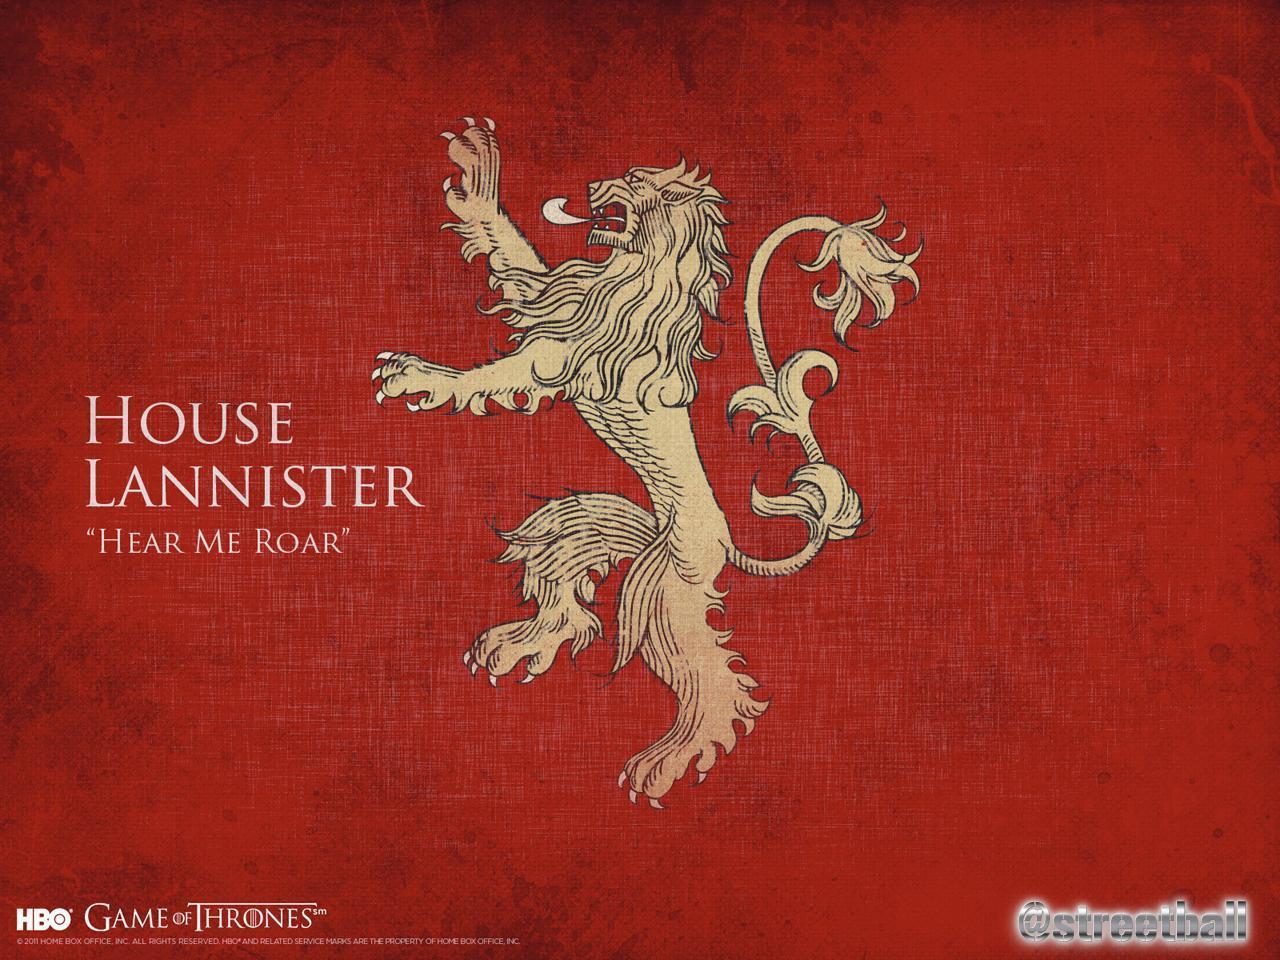 Game of Thrones House Lannister Wallpaper